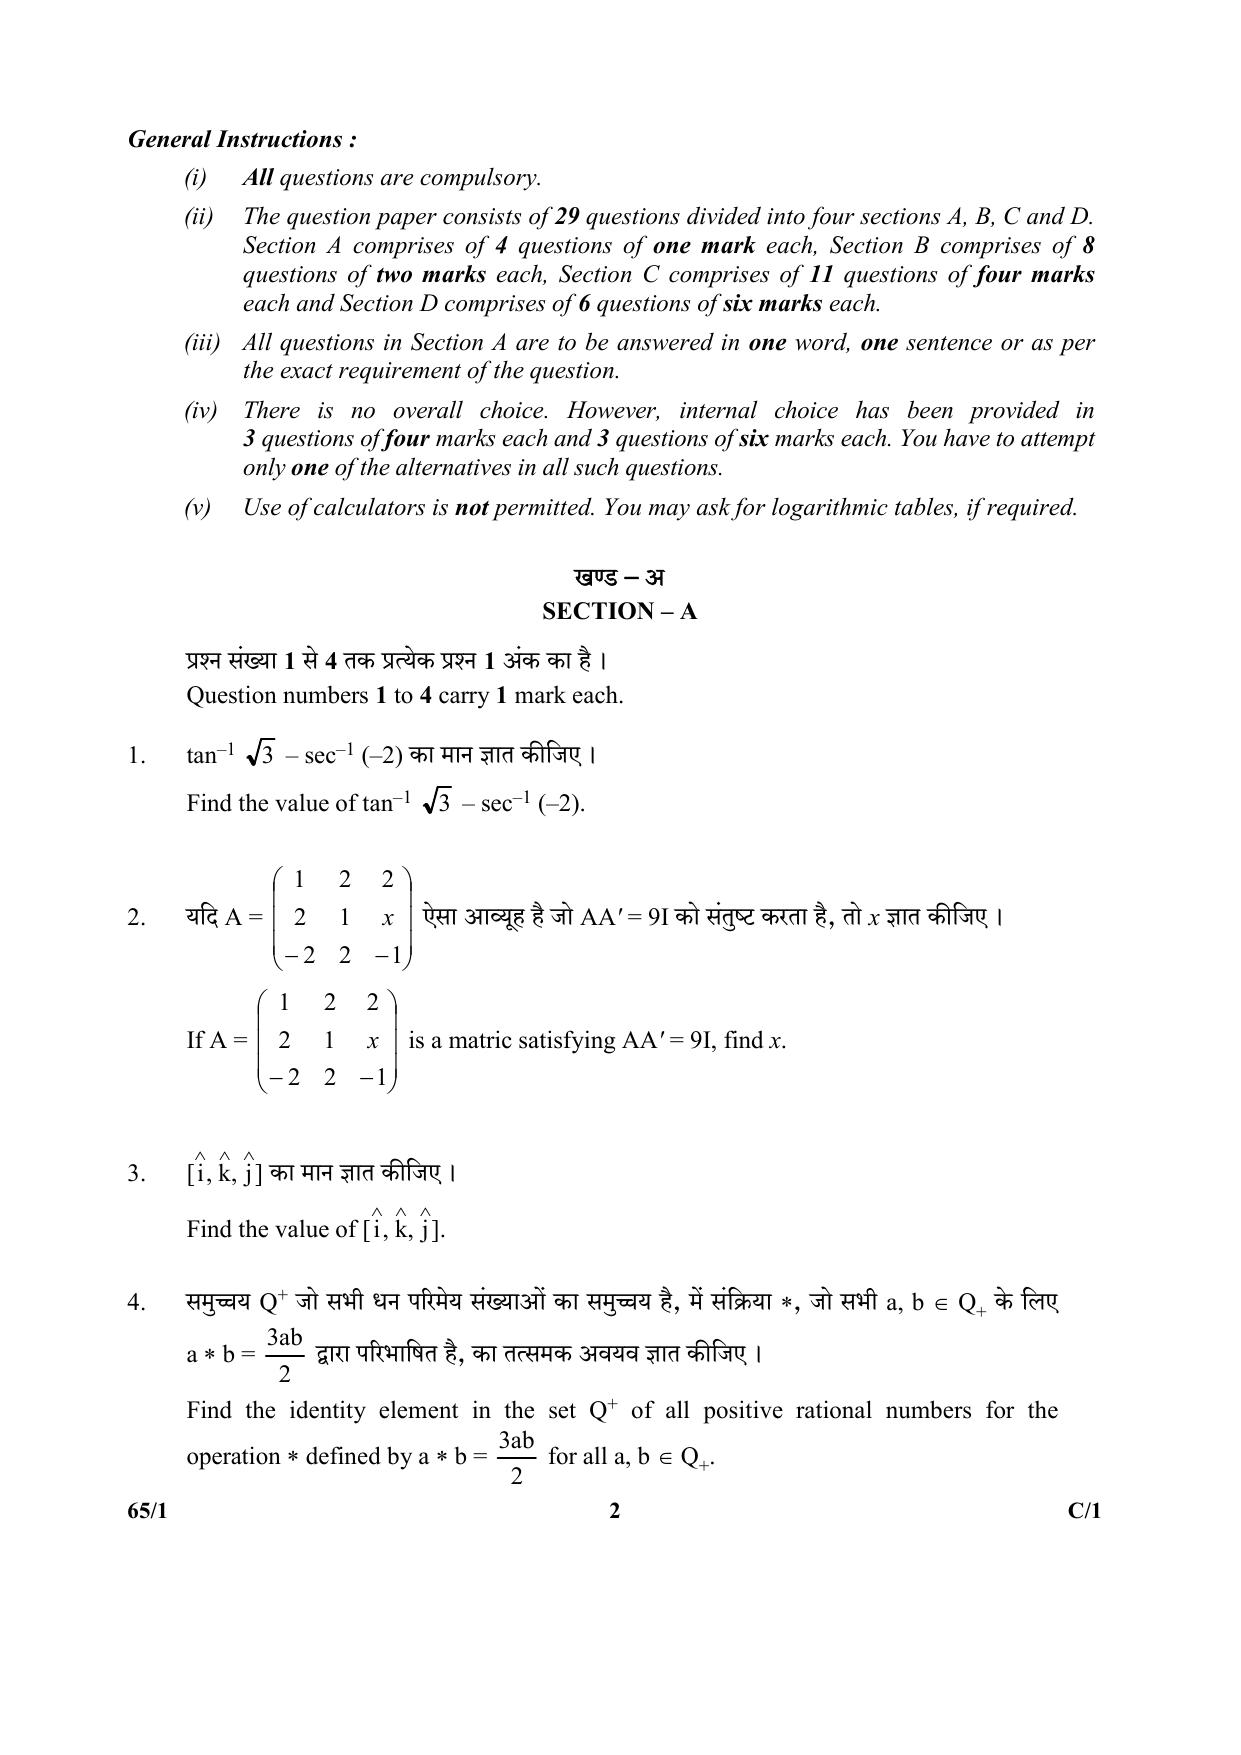 CBSE Class 12 65-1 (Mathematics) 2018 Compartment Question Paper - Page 2